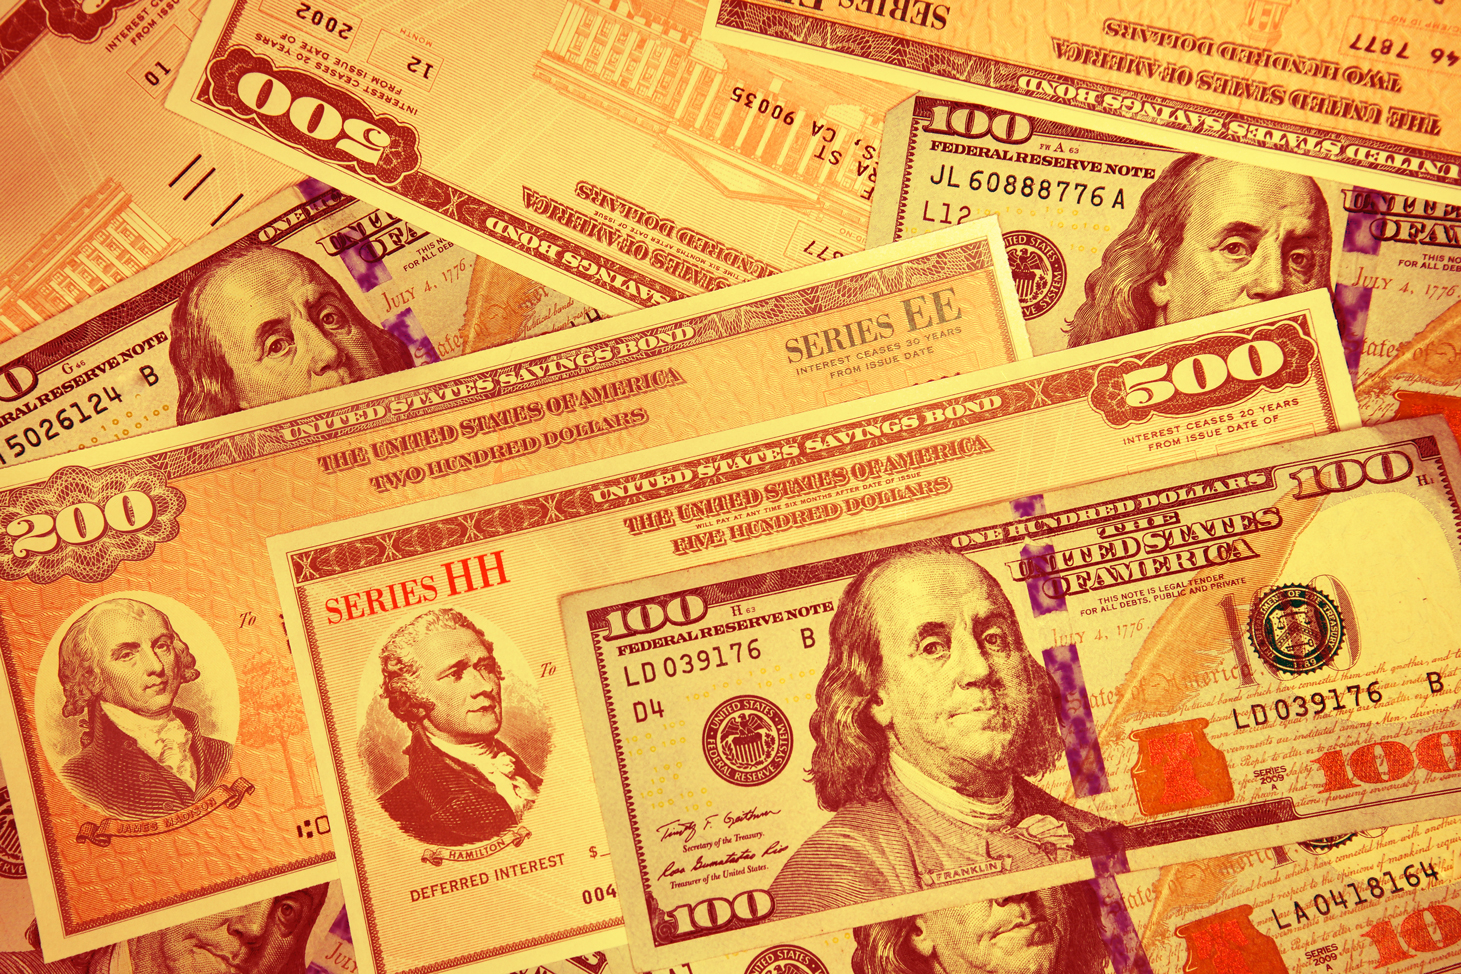 eries HH and Series EE United States Treasury Savings Bonds surrounded by US currency in cluding a $100 bill